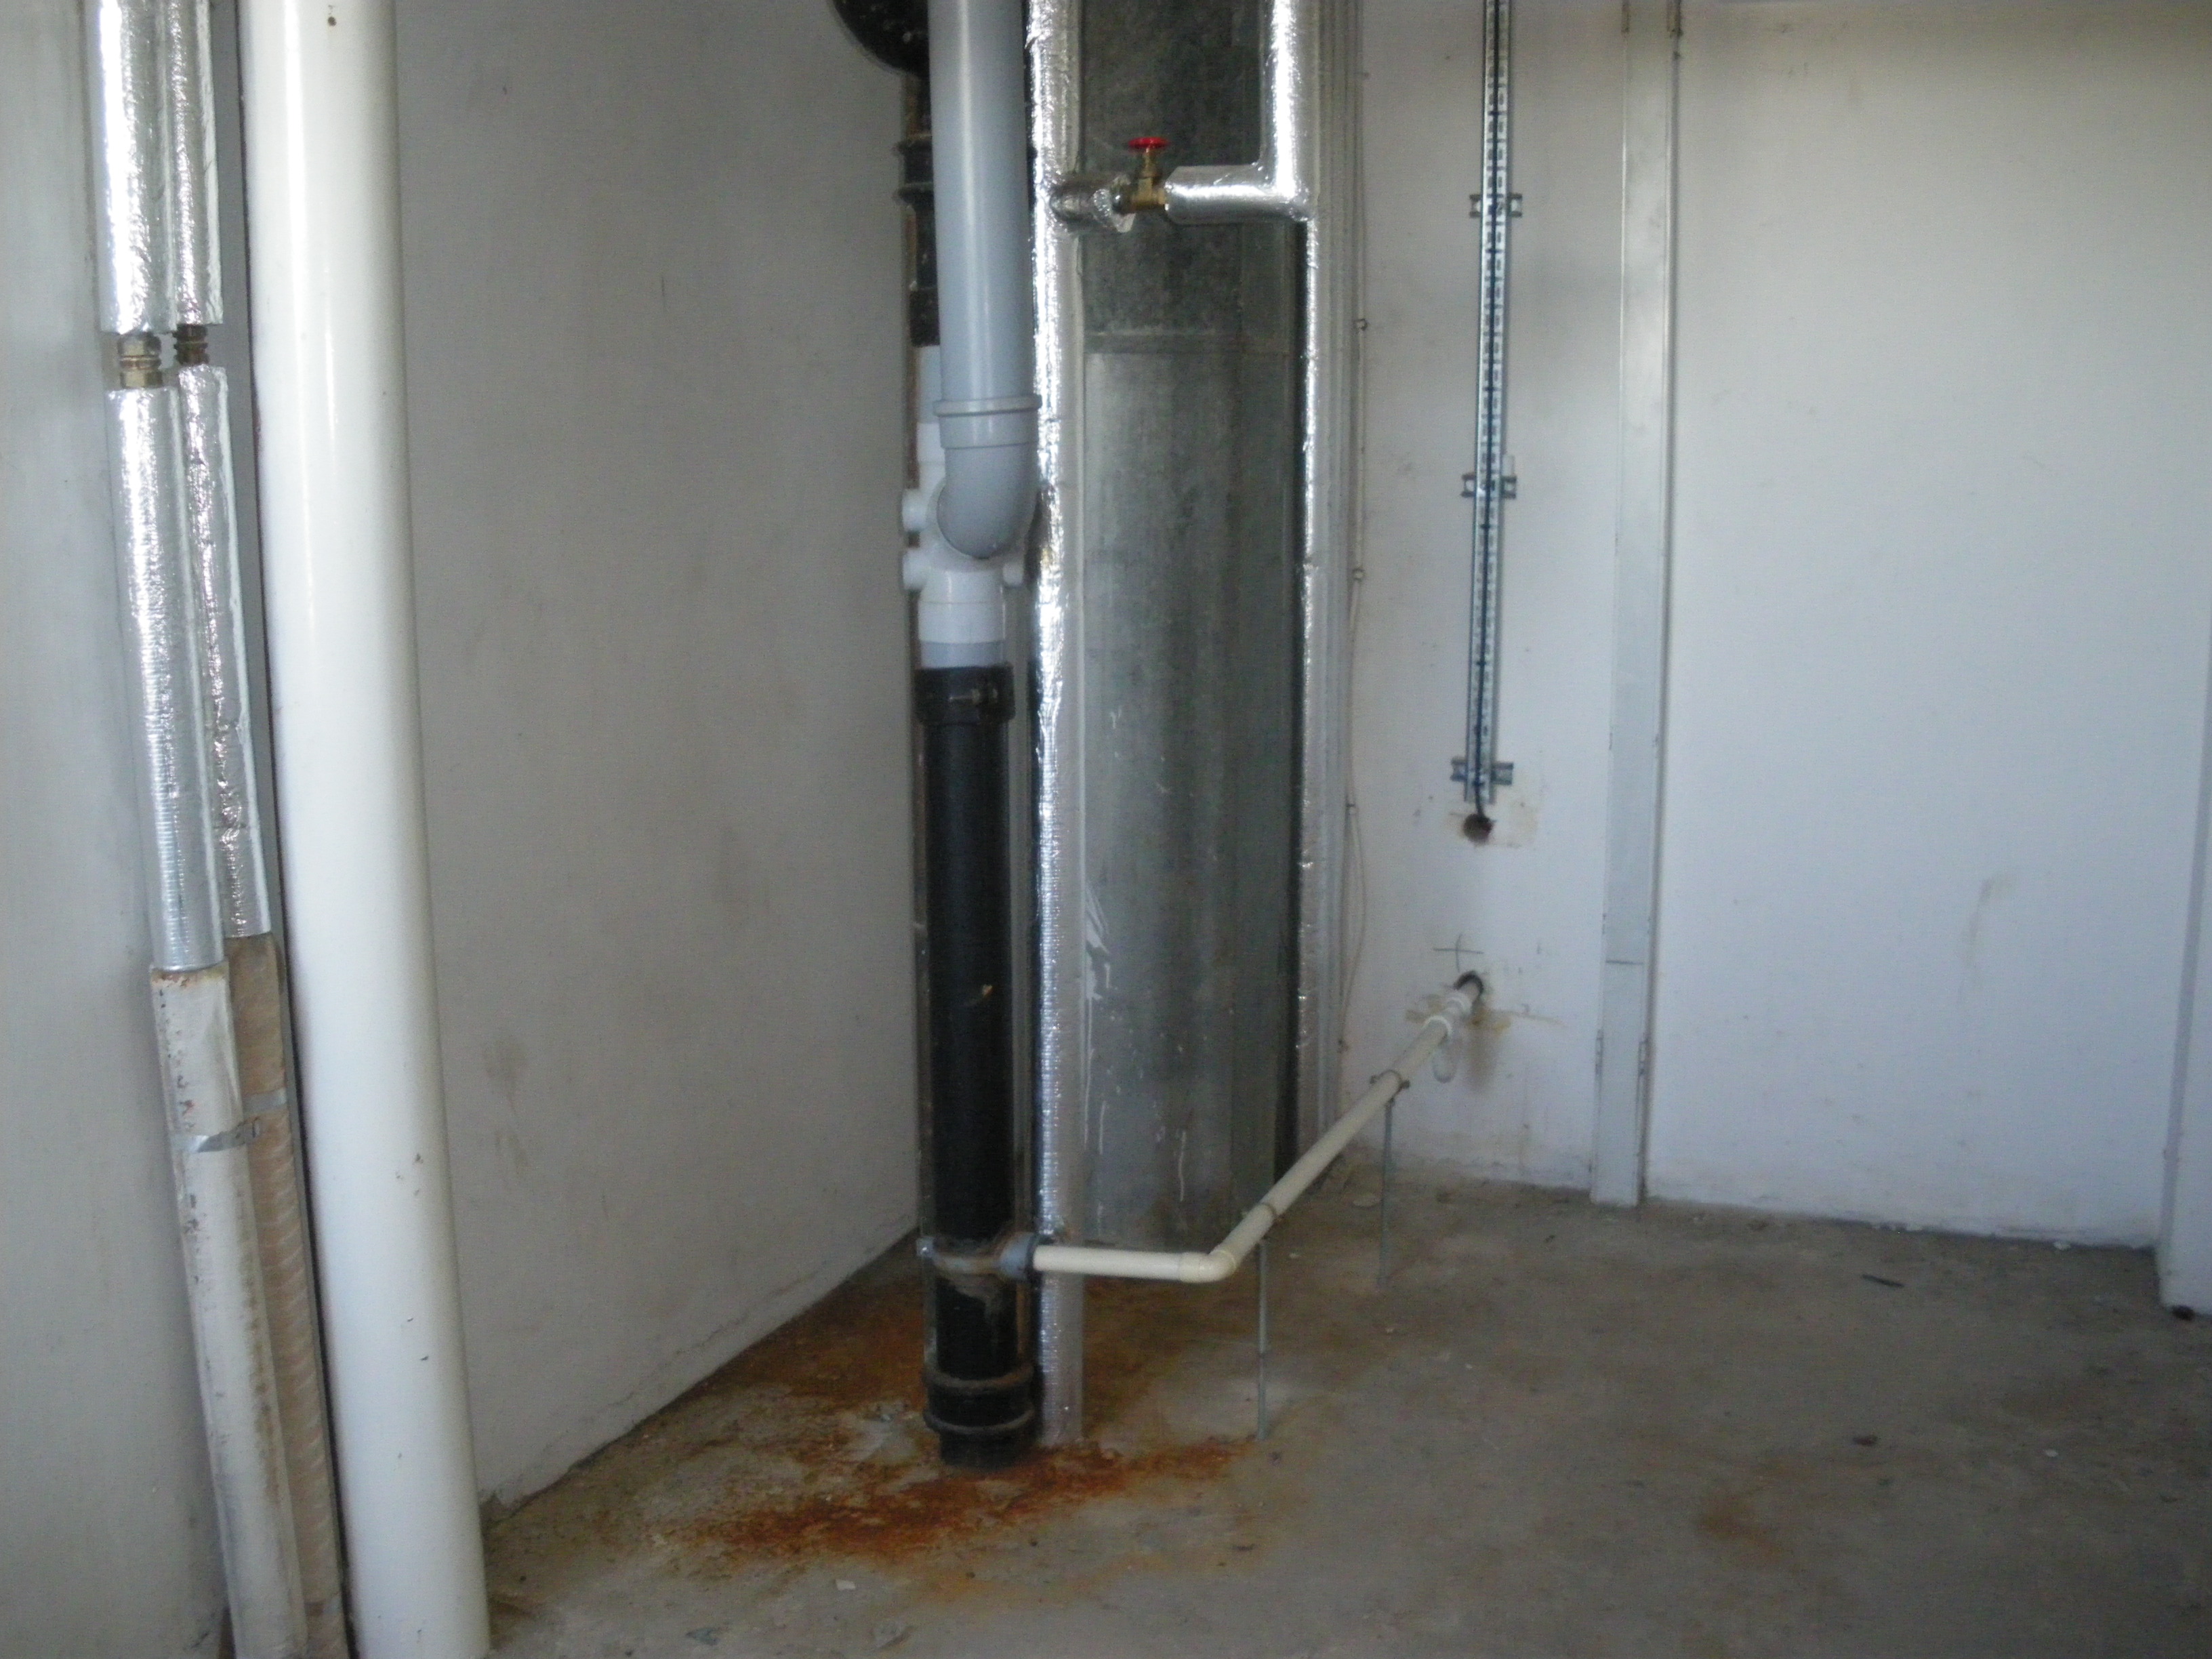 W302 ducting and pipework